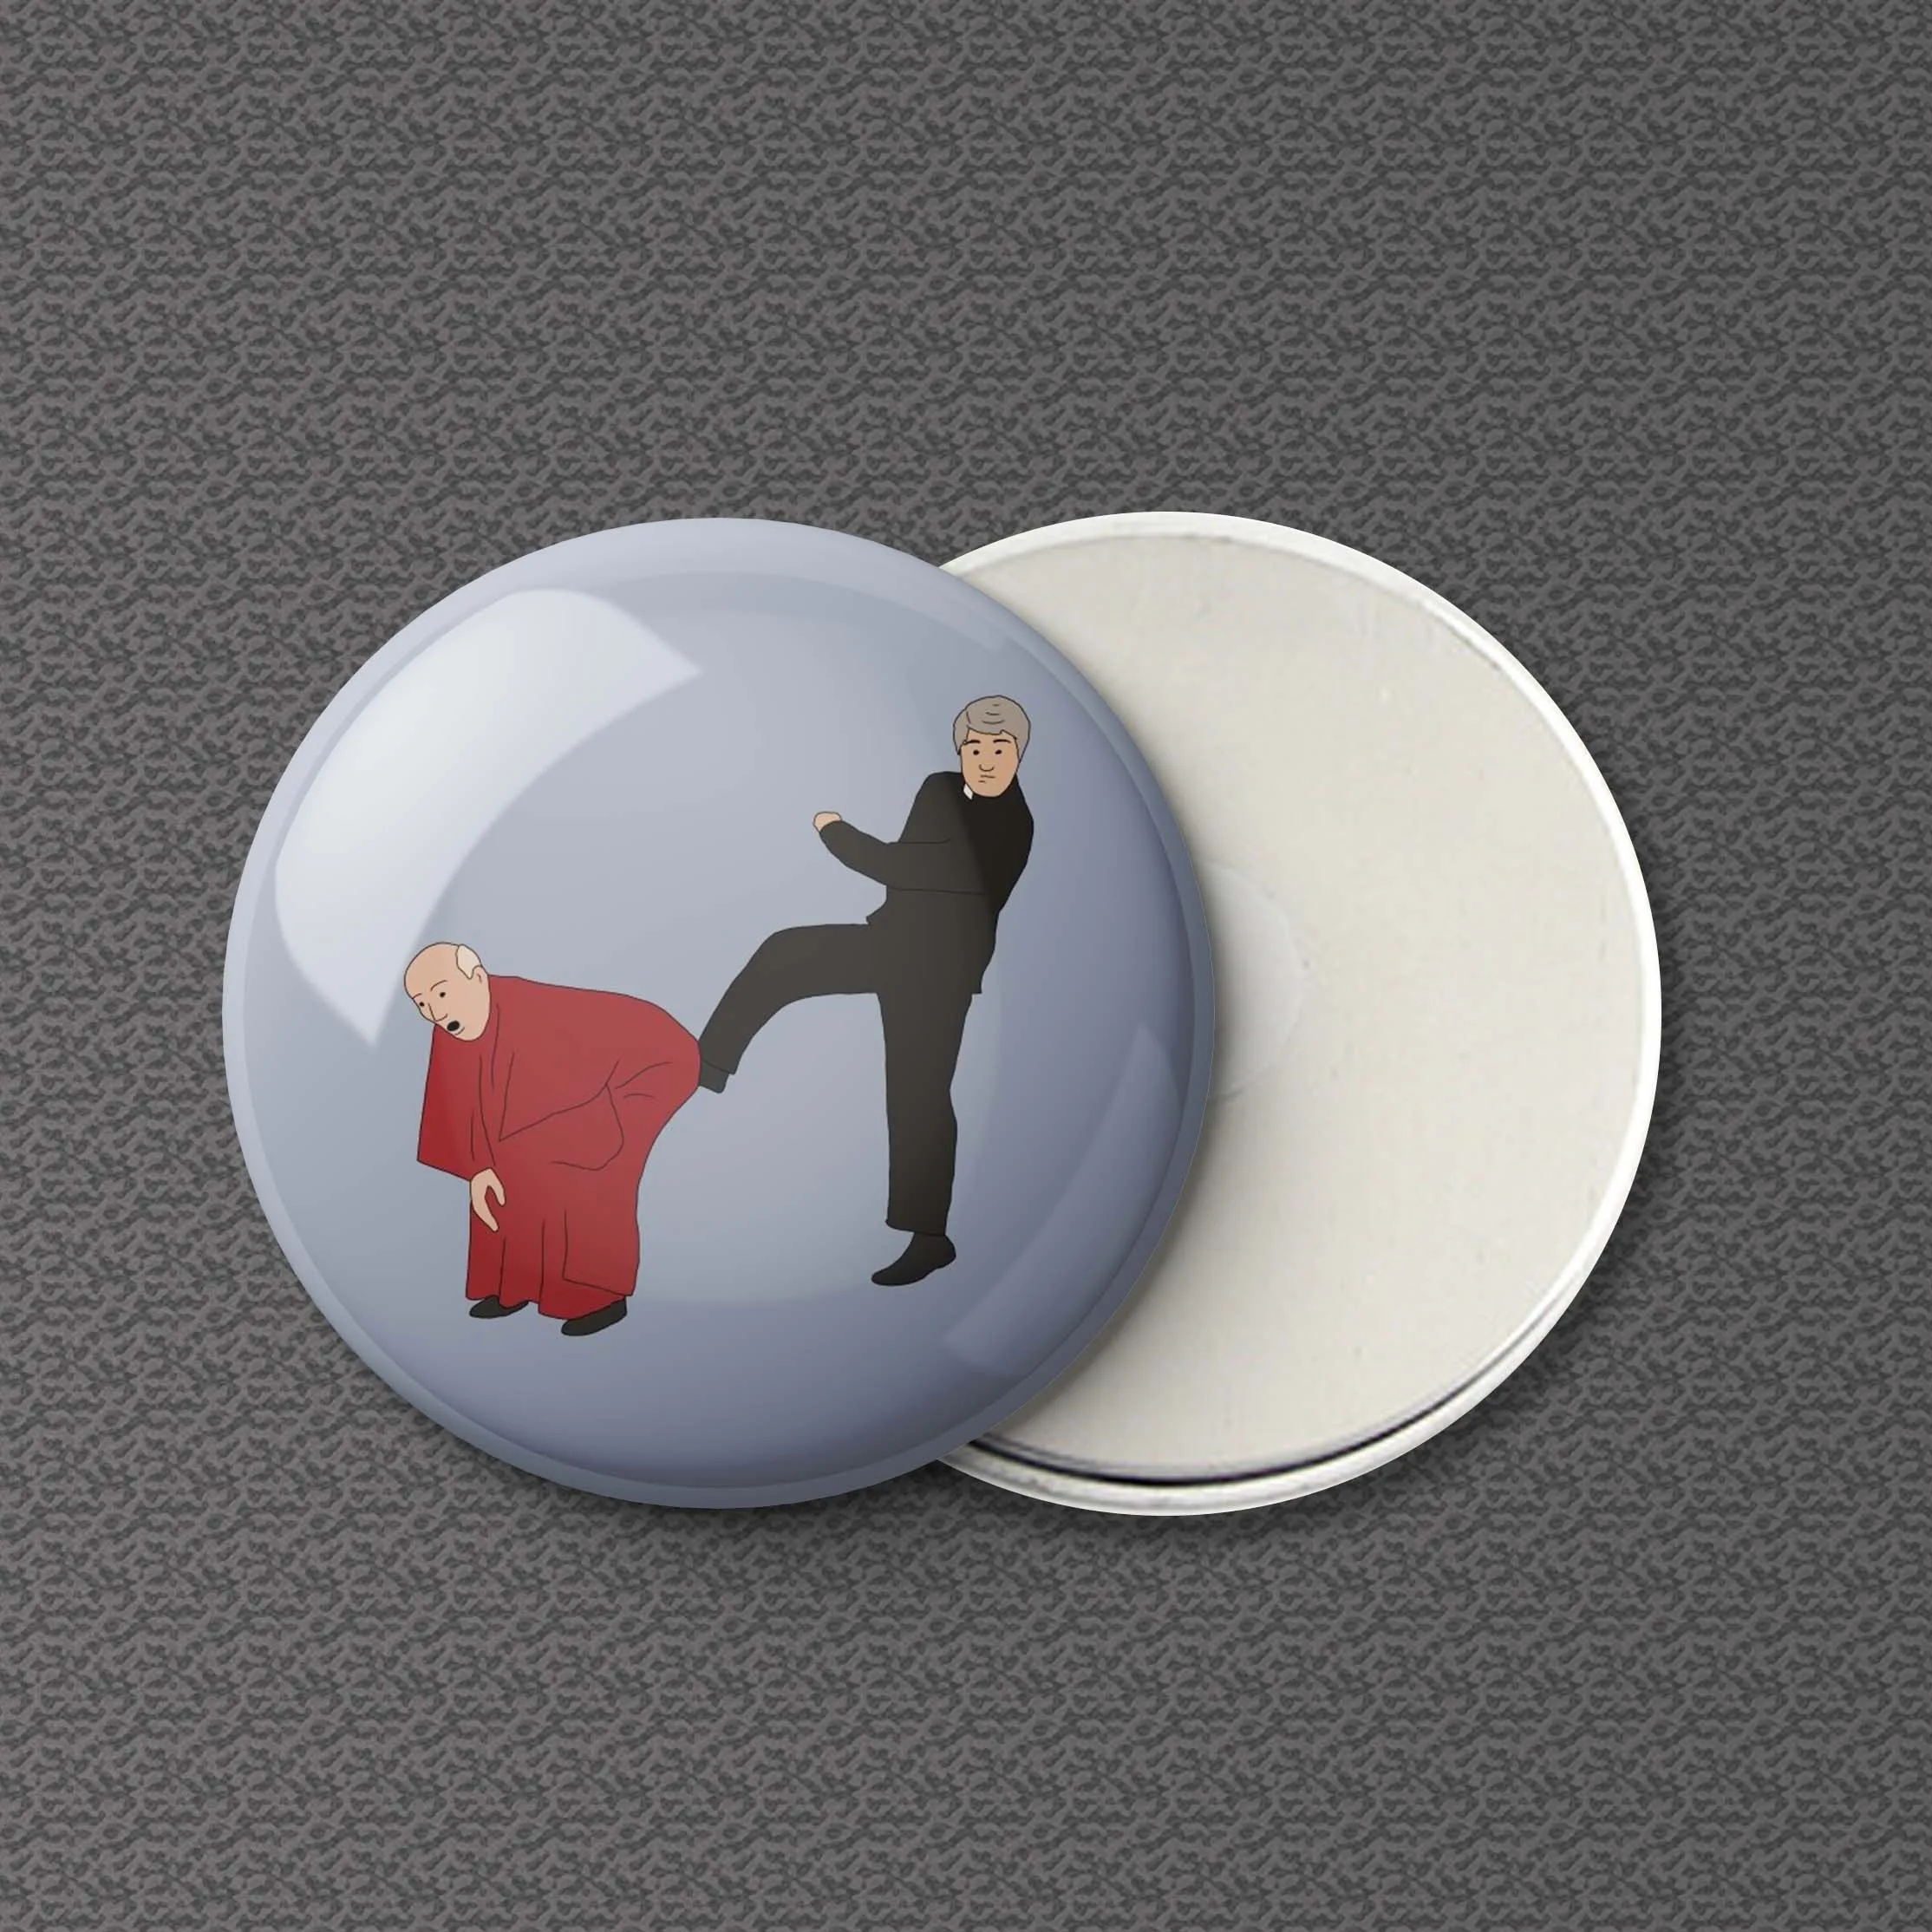 

Father Ted Kicking Bishop Brennan Up The Arse Refrigerator Magnet Metal Kitchen Jewelry Gift Funny Decor Women Home Cartoon